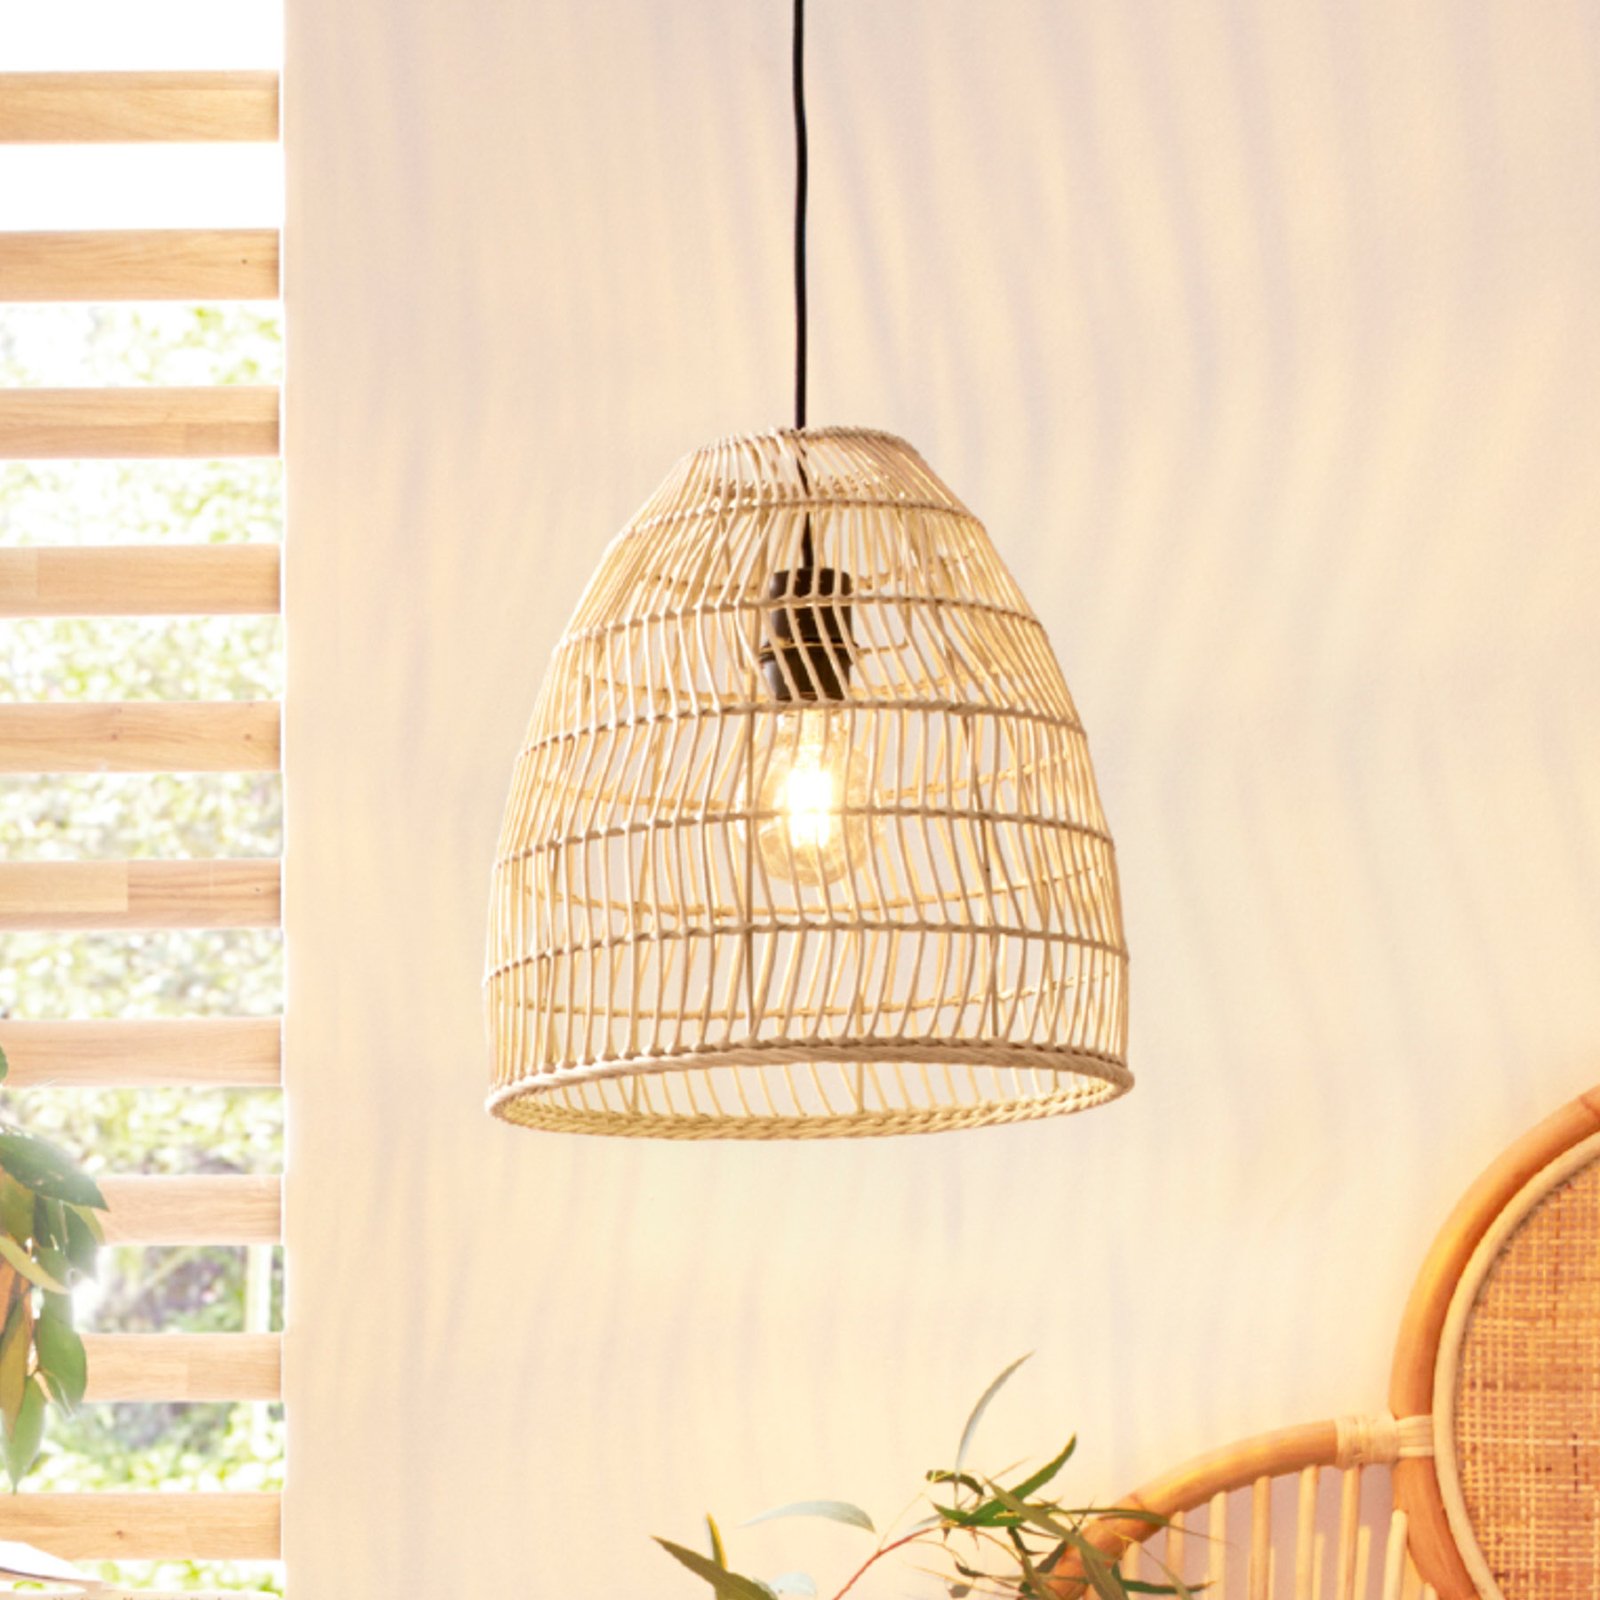 Ayesgarth pendant light with a rattan lampshade